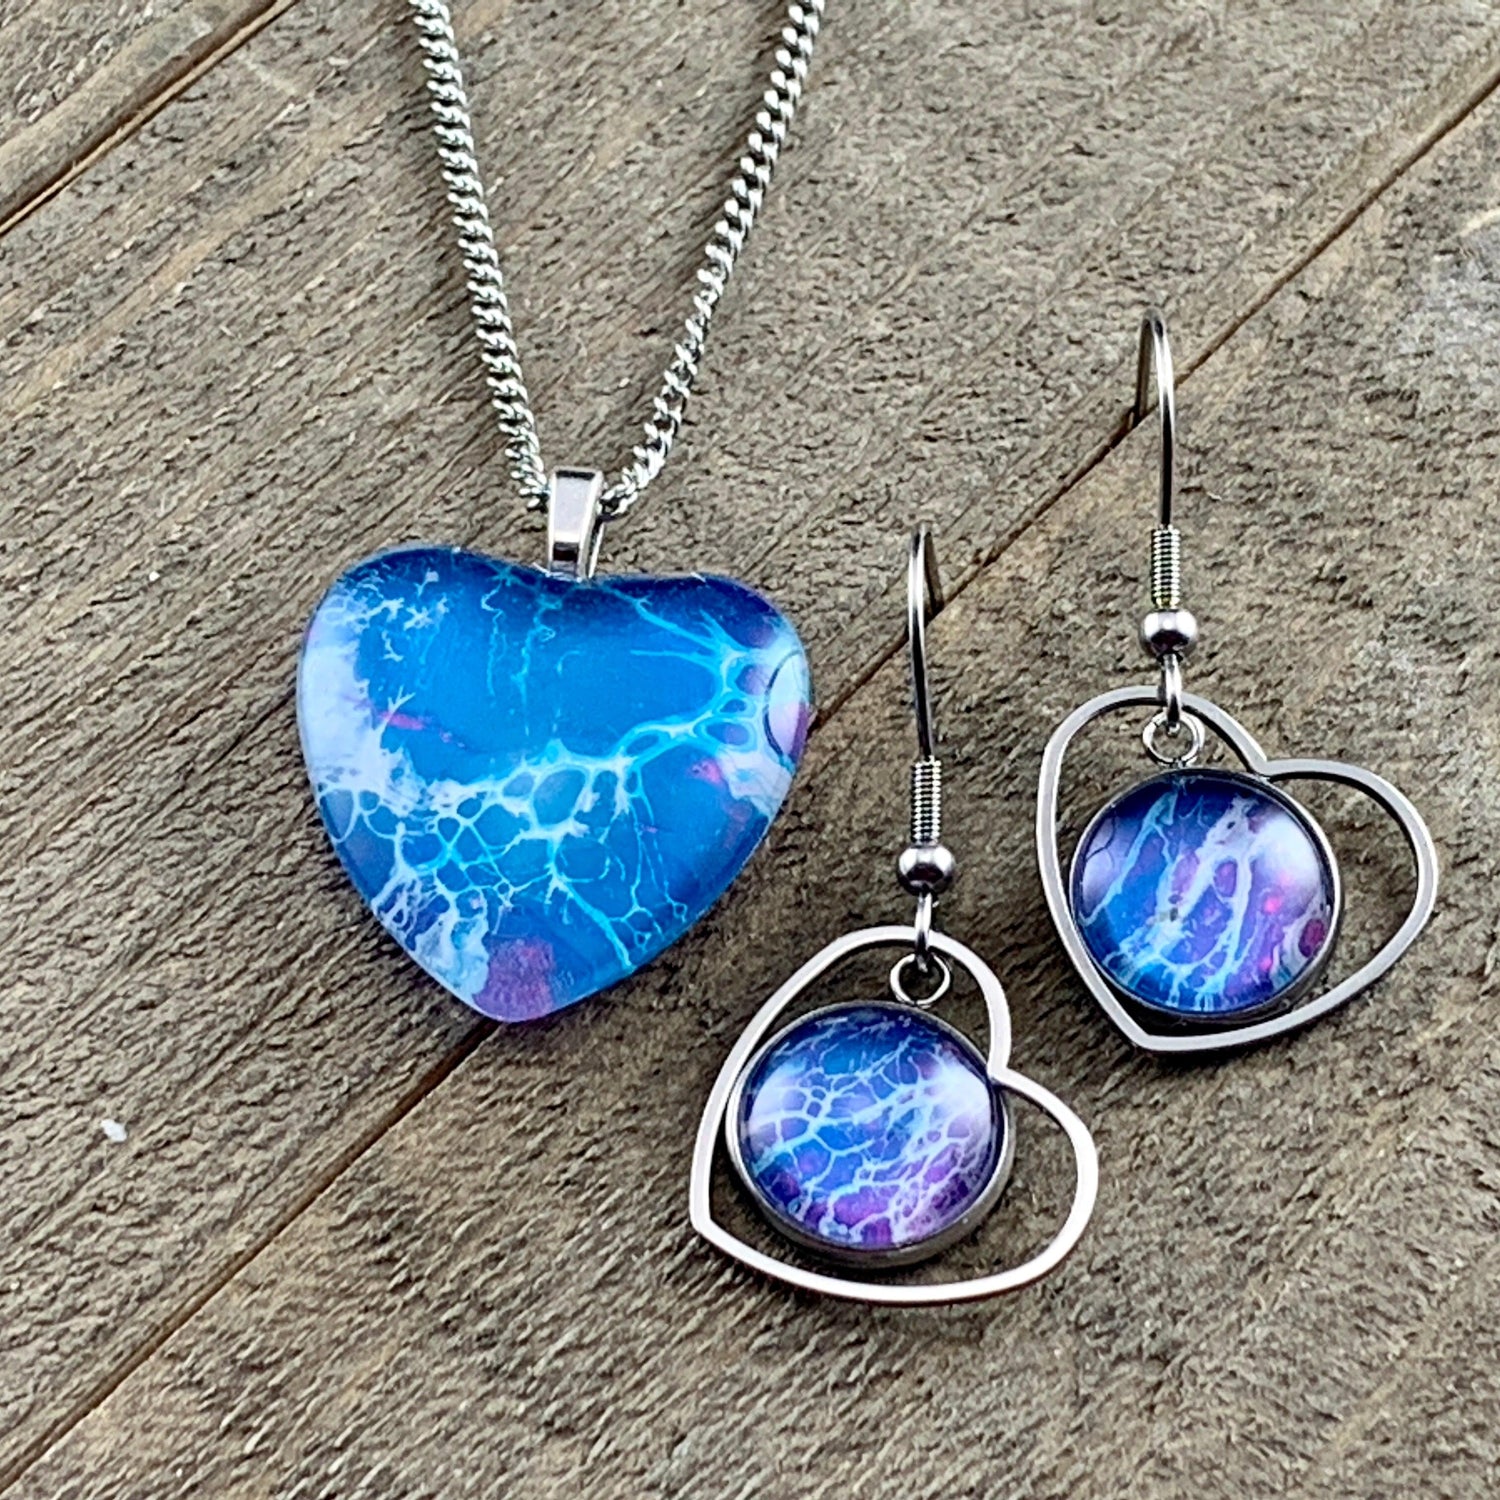 Heart Wearable Art Pendant and Earring Sets - Cinder House Creations